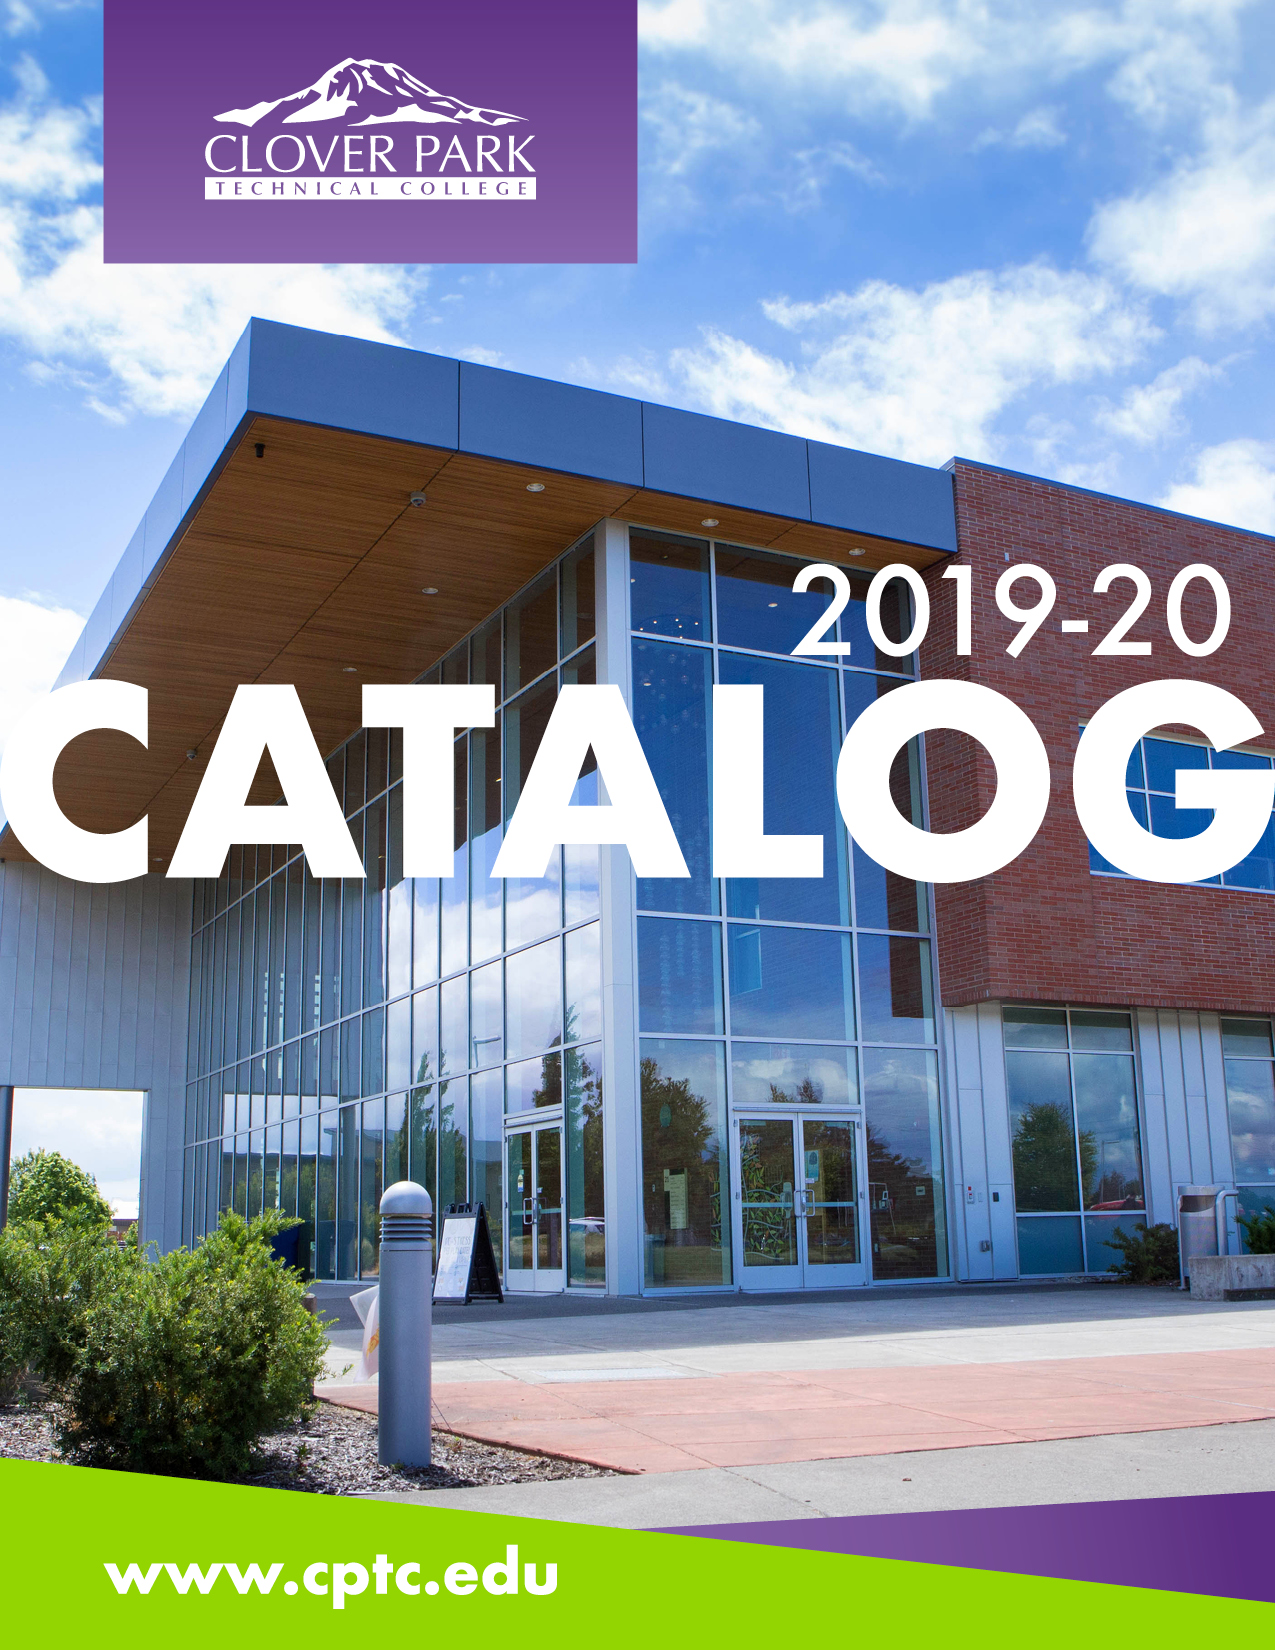 Image of campus building. Text: 2019-20 CATALOG